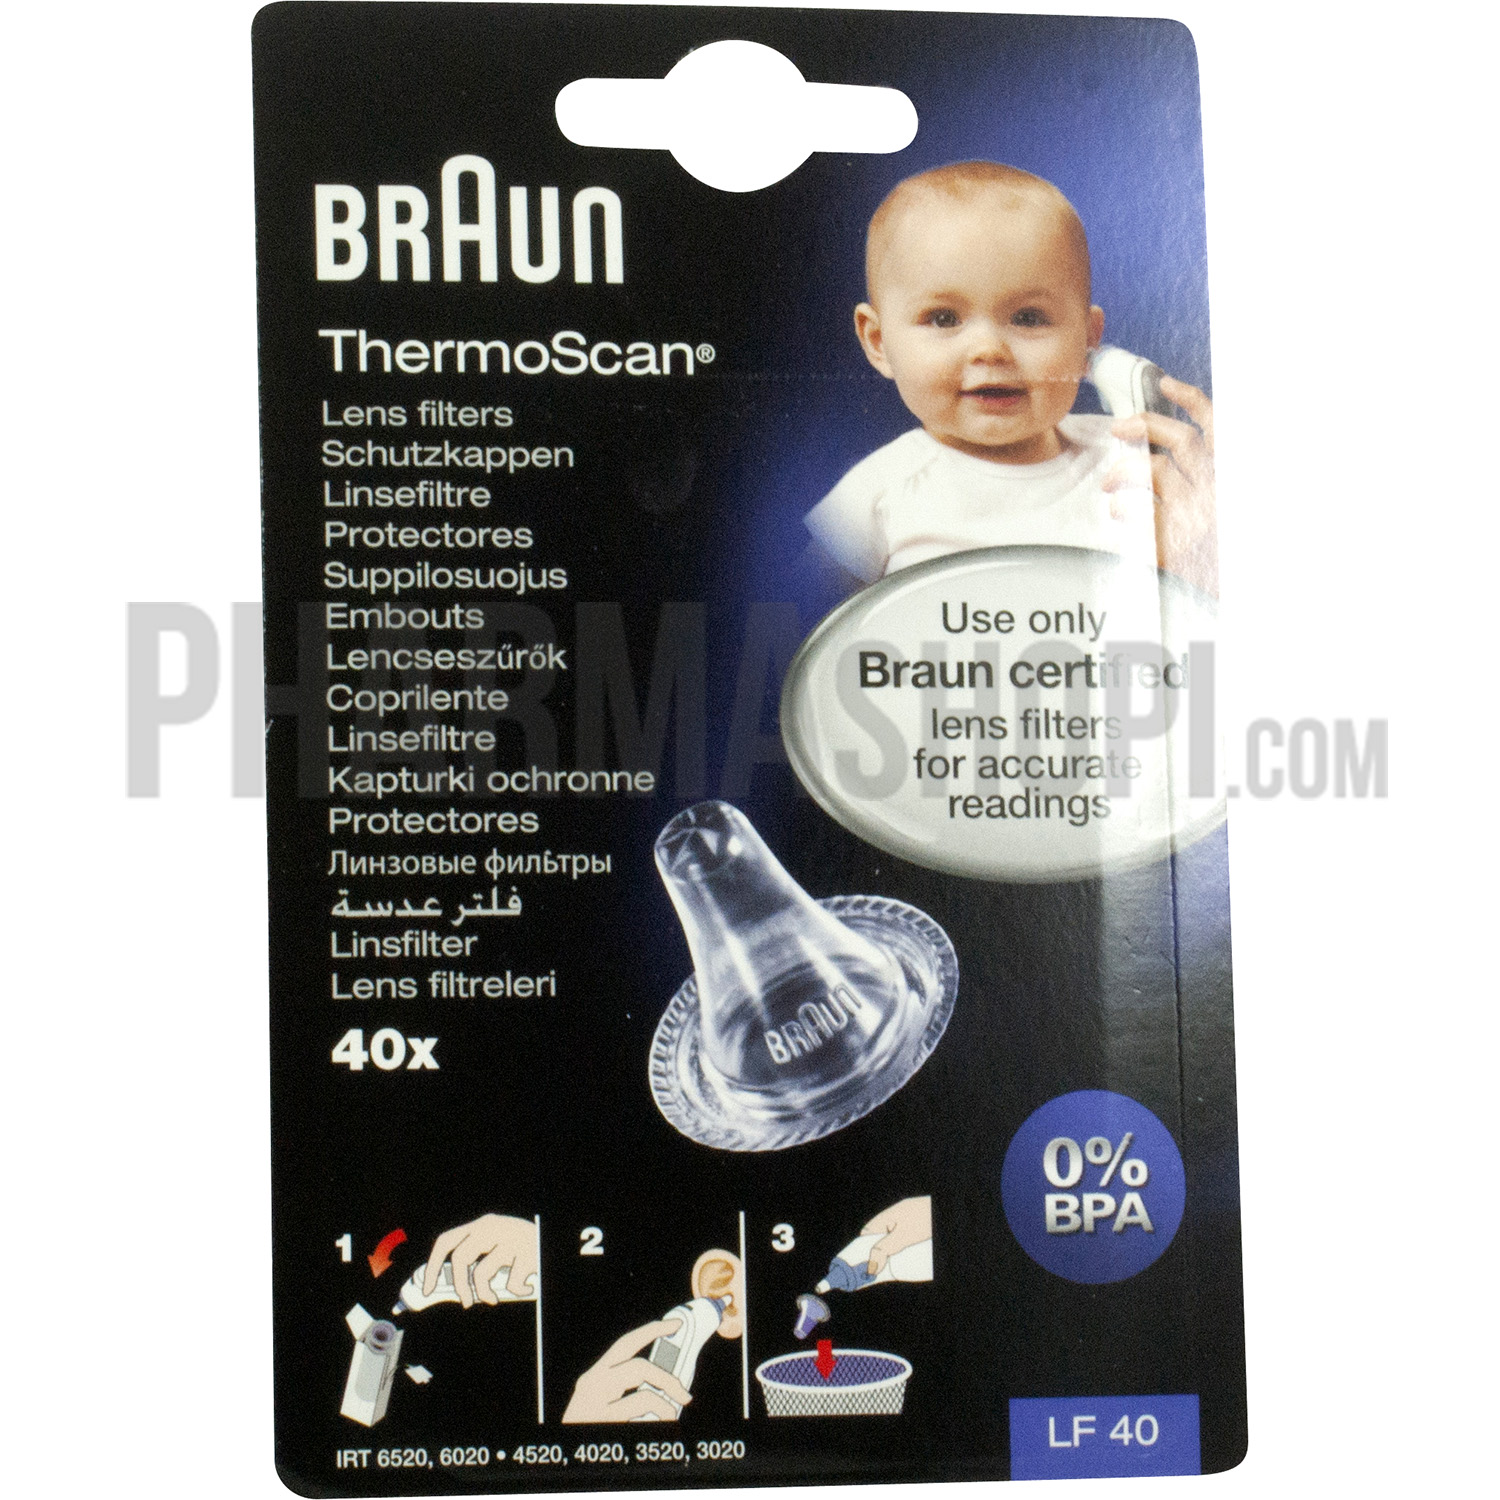 https://www.pharmashopi.com/images/Image/Embouts-jetables-pour-thermometre-auriculaire-Braun-bo.jpg